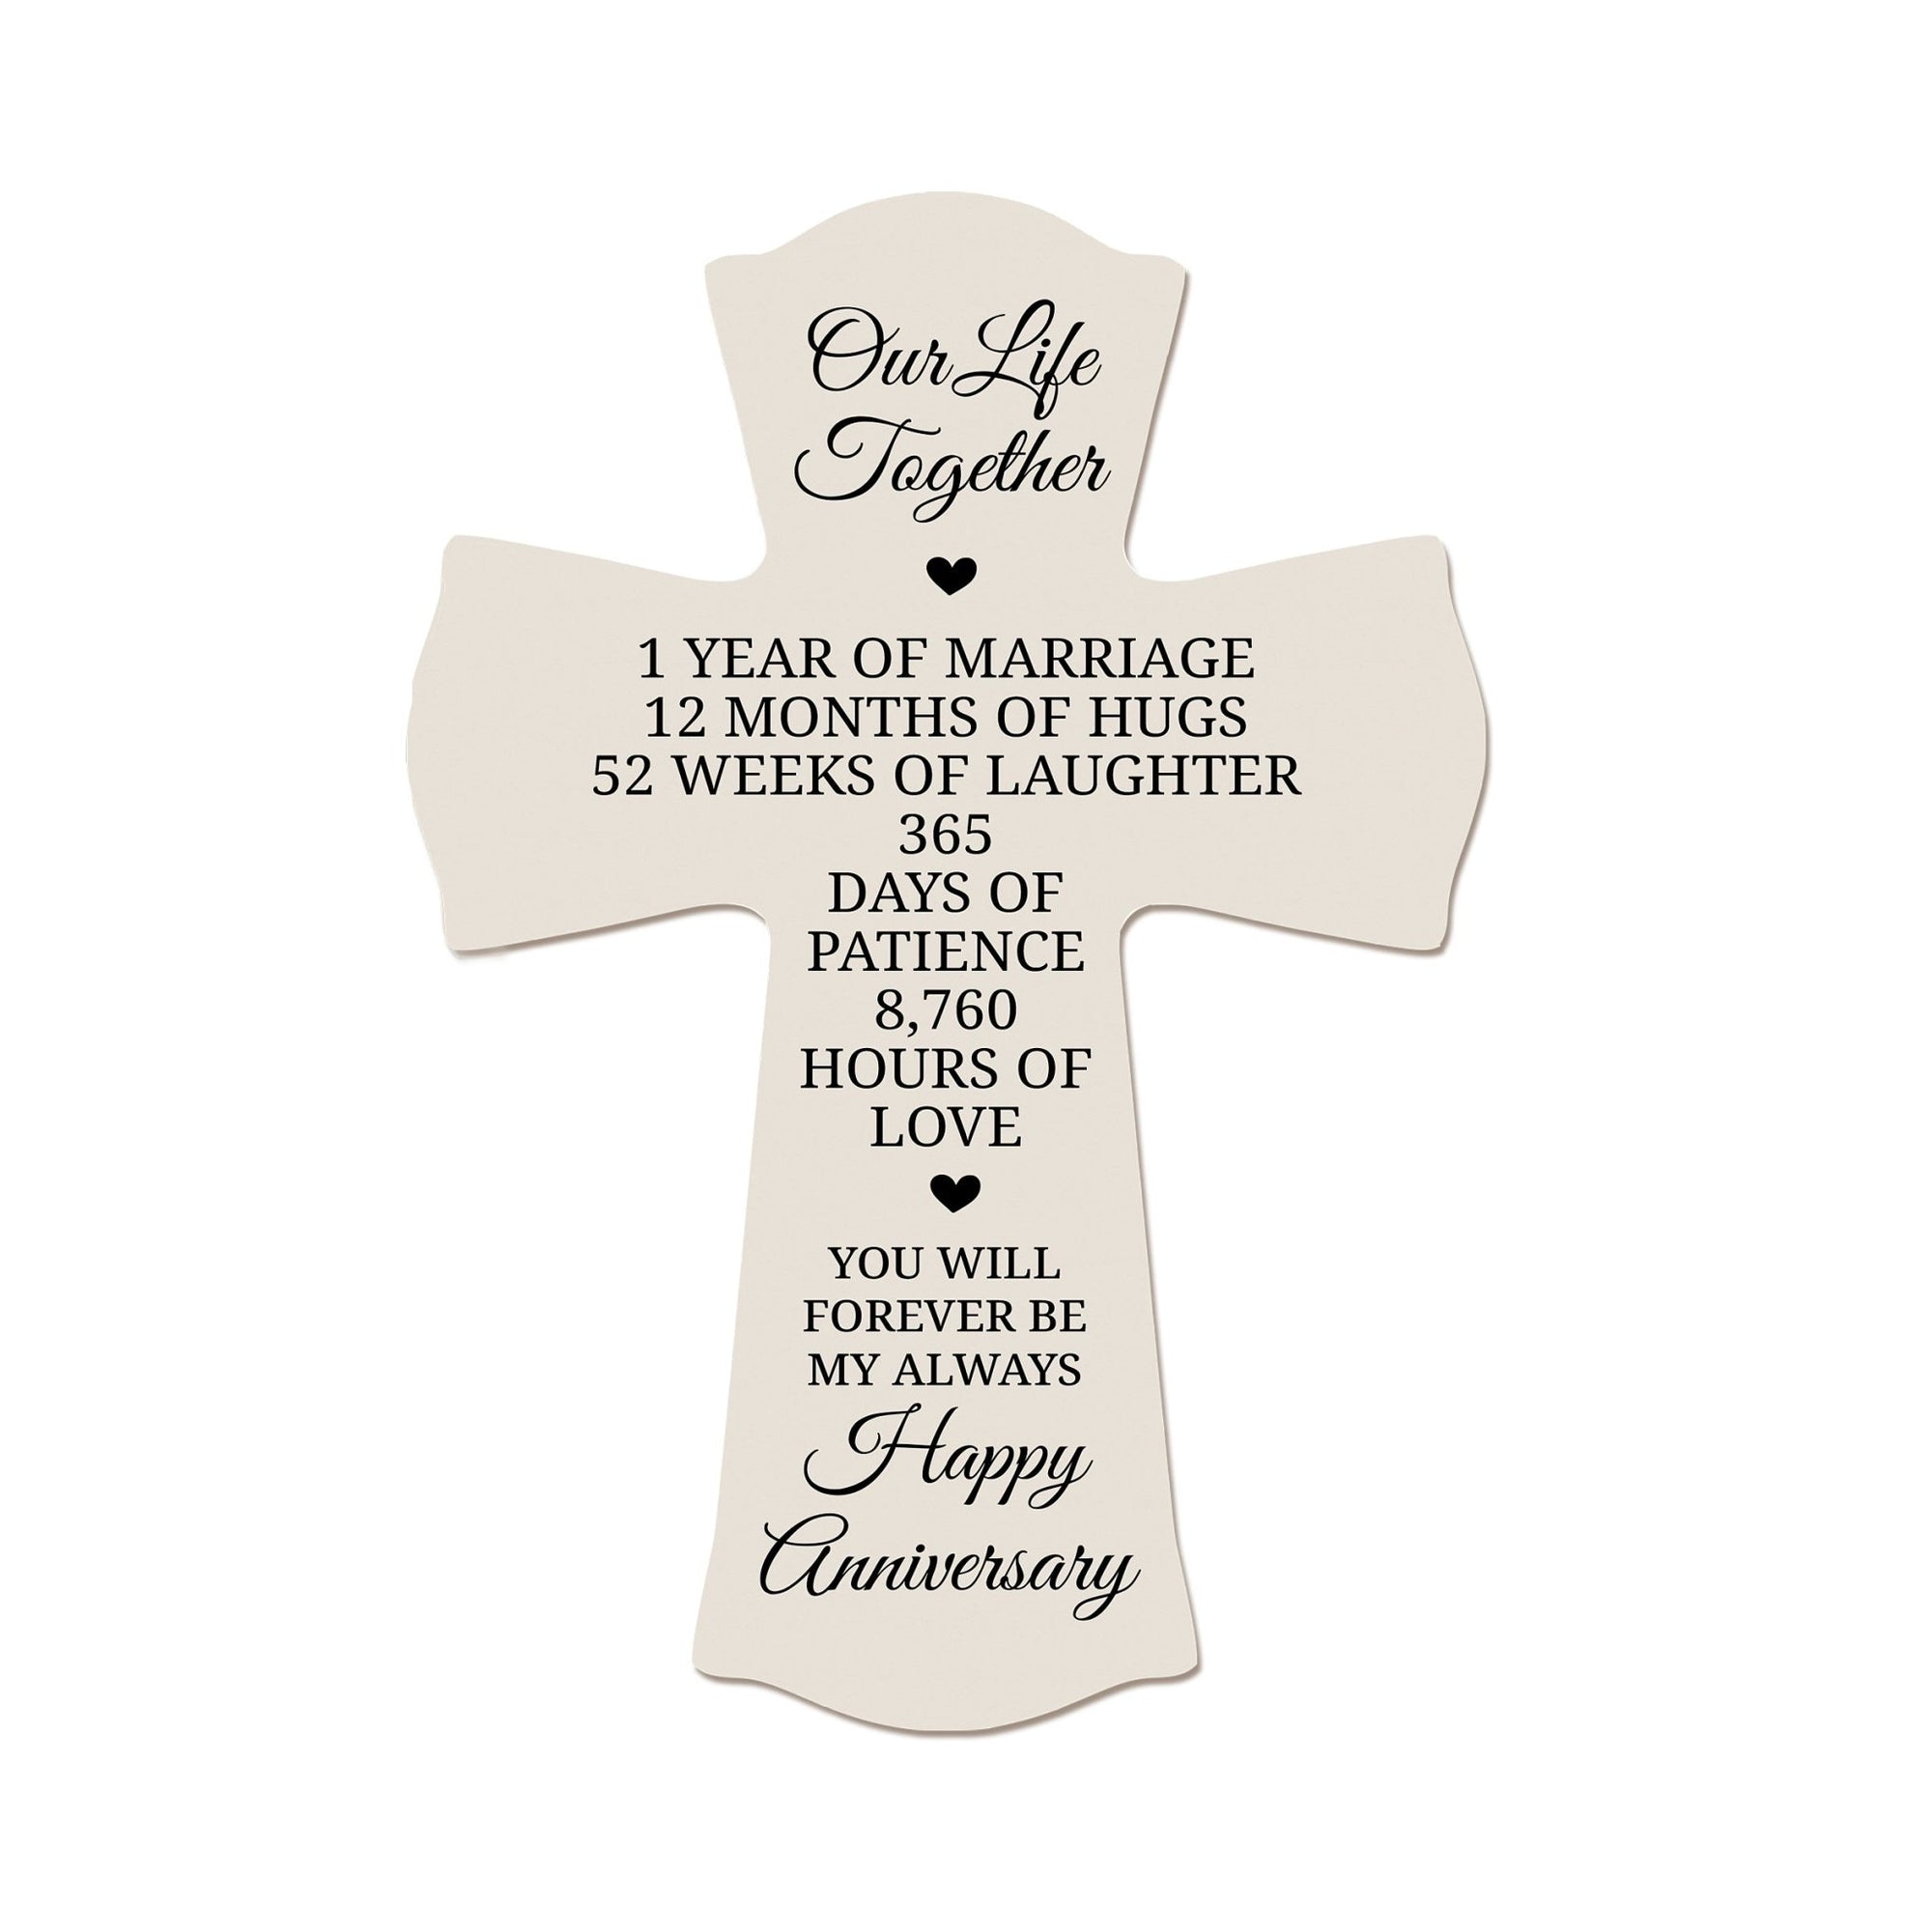 Personalized Wall Cross Gifts for 1st Wedding Anniversary - Our Life Together - LifeSong Milestones